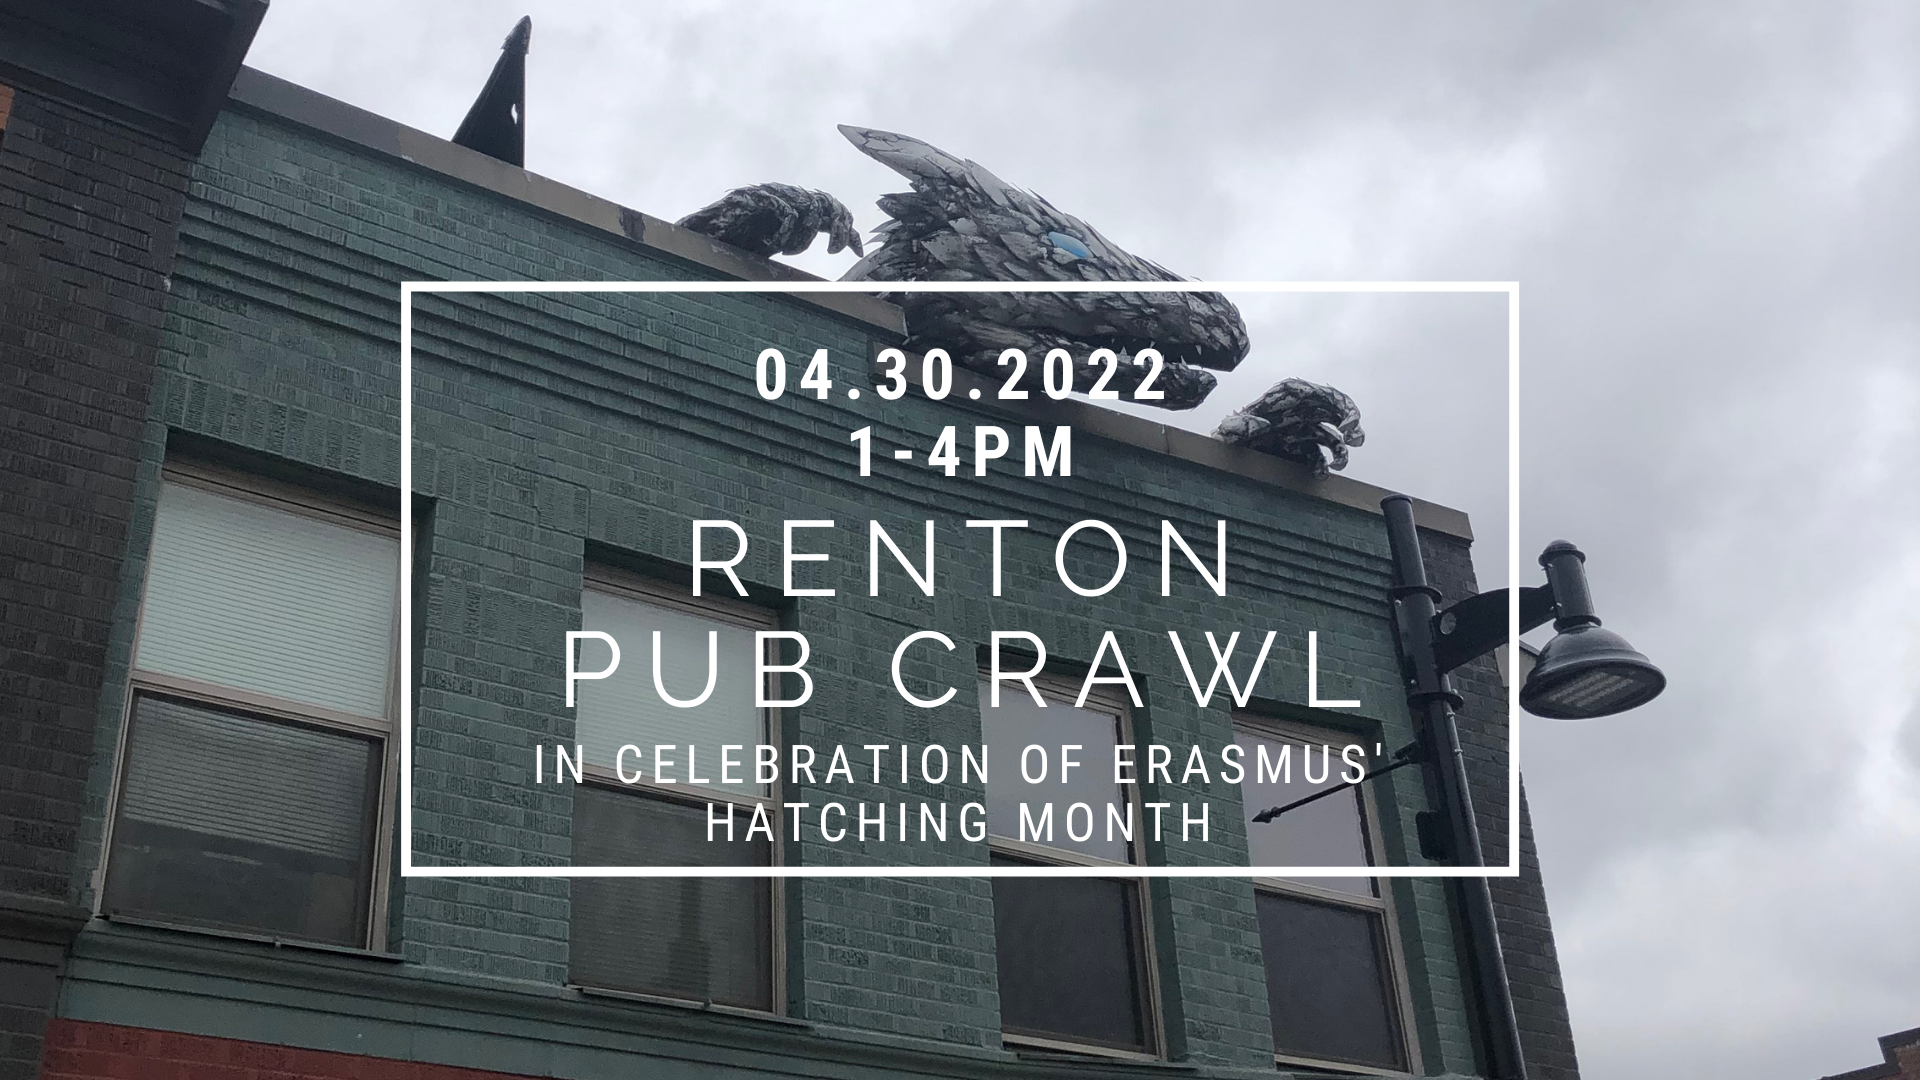 In the background of text a dragon peeks over the side of a building. The text reads 4/30/2022 1-4PM Renton Pub Crawl in Celebration of Erasmus' Hatching Month